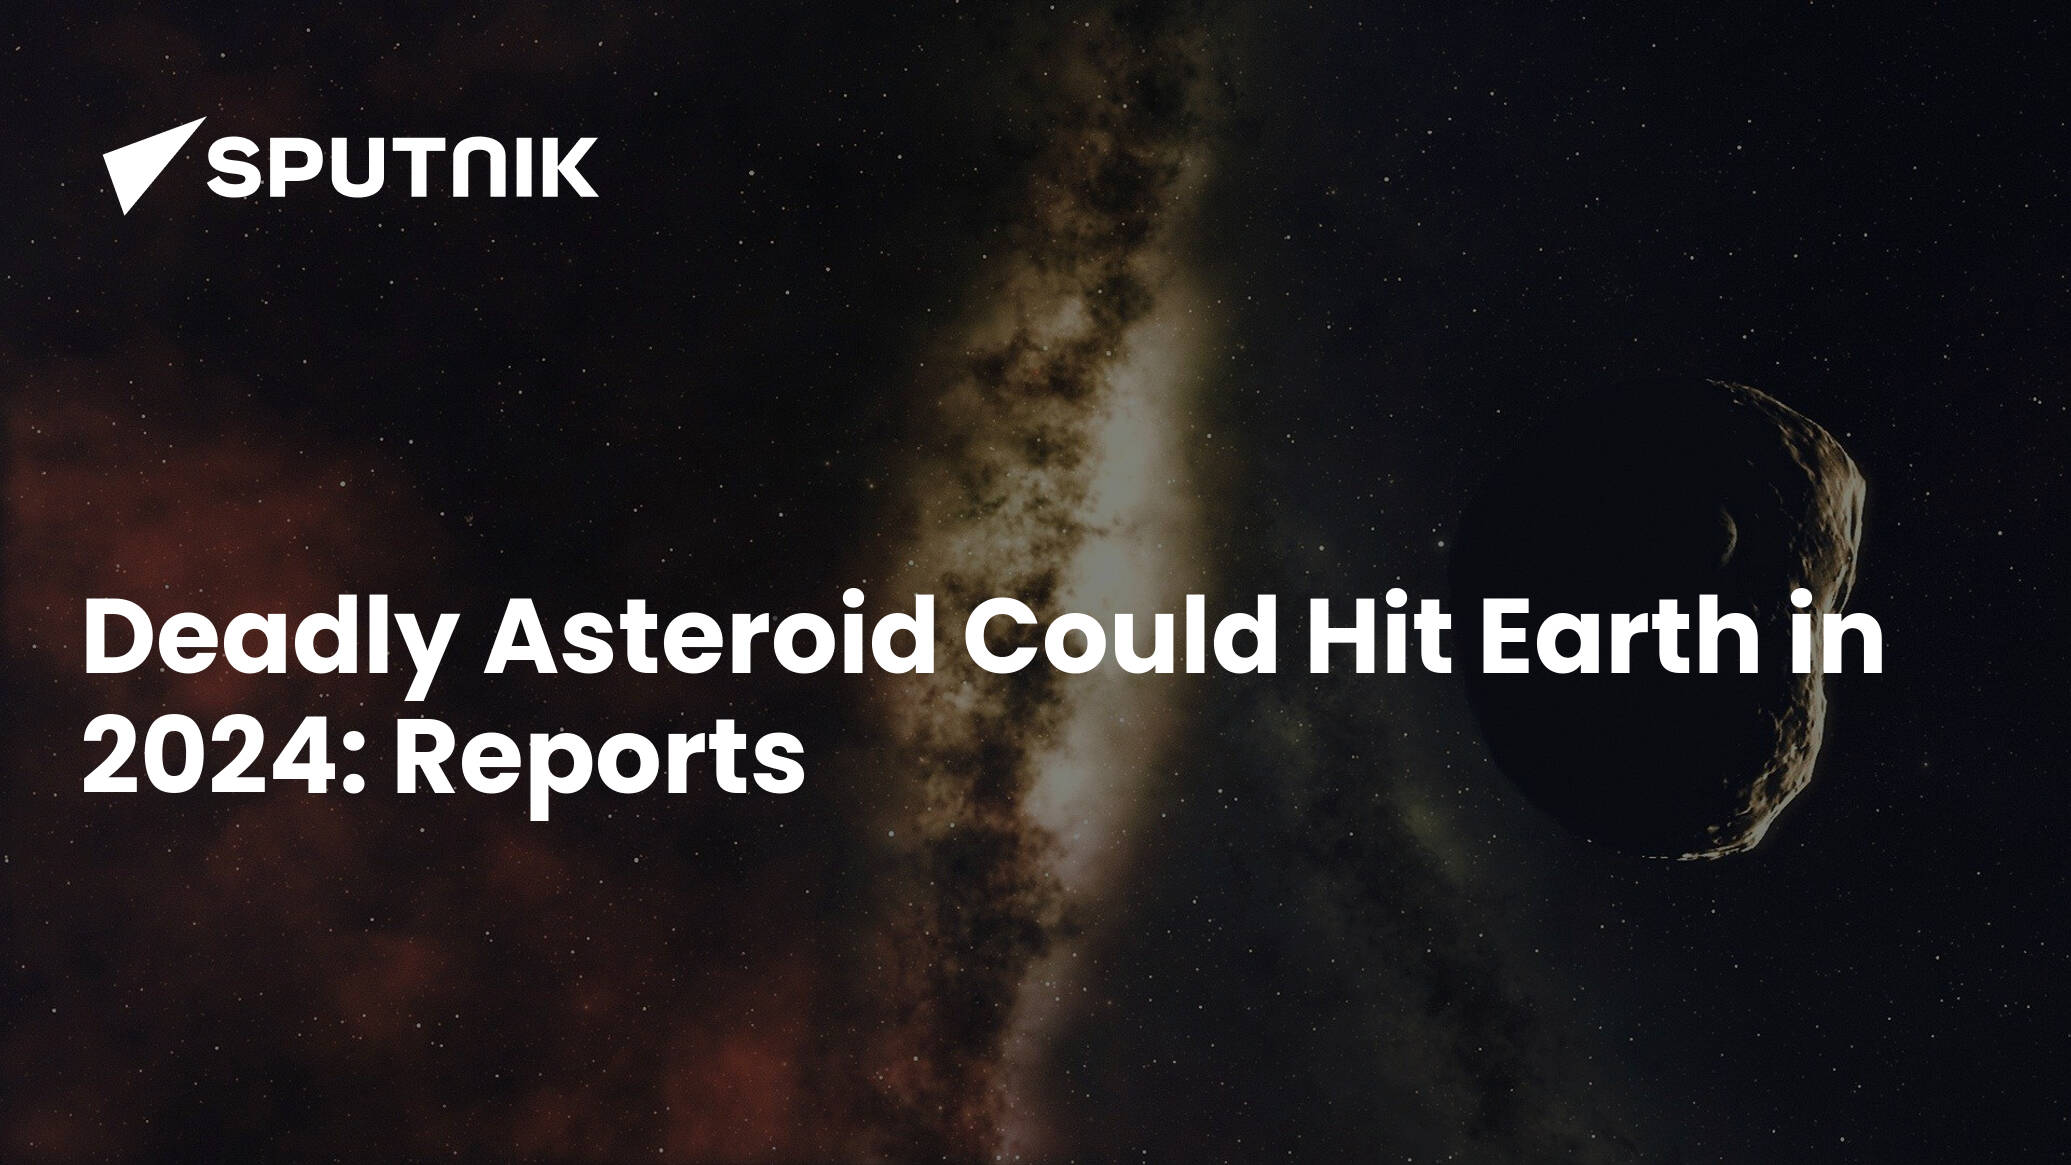 Deadly Asteroid Could Hit Earth in 2024 Reports